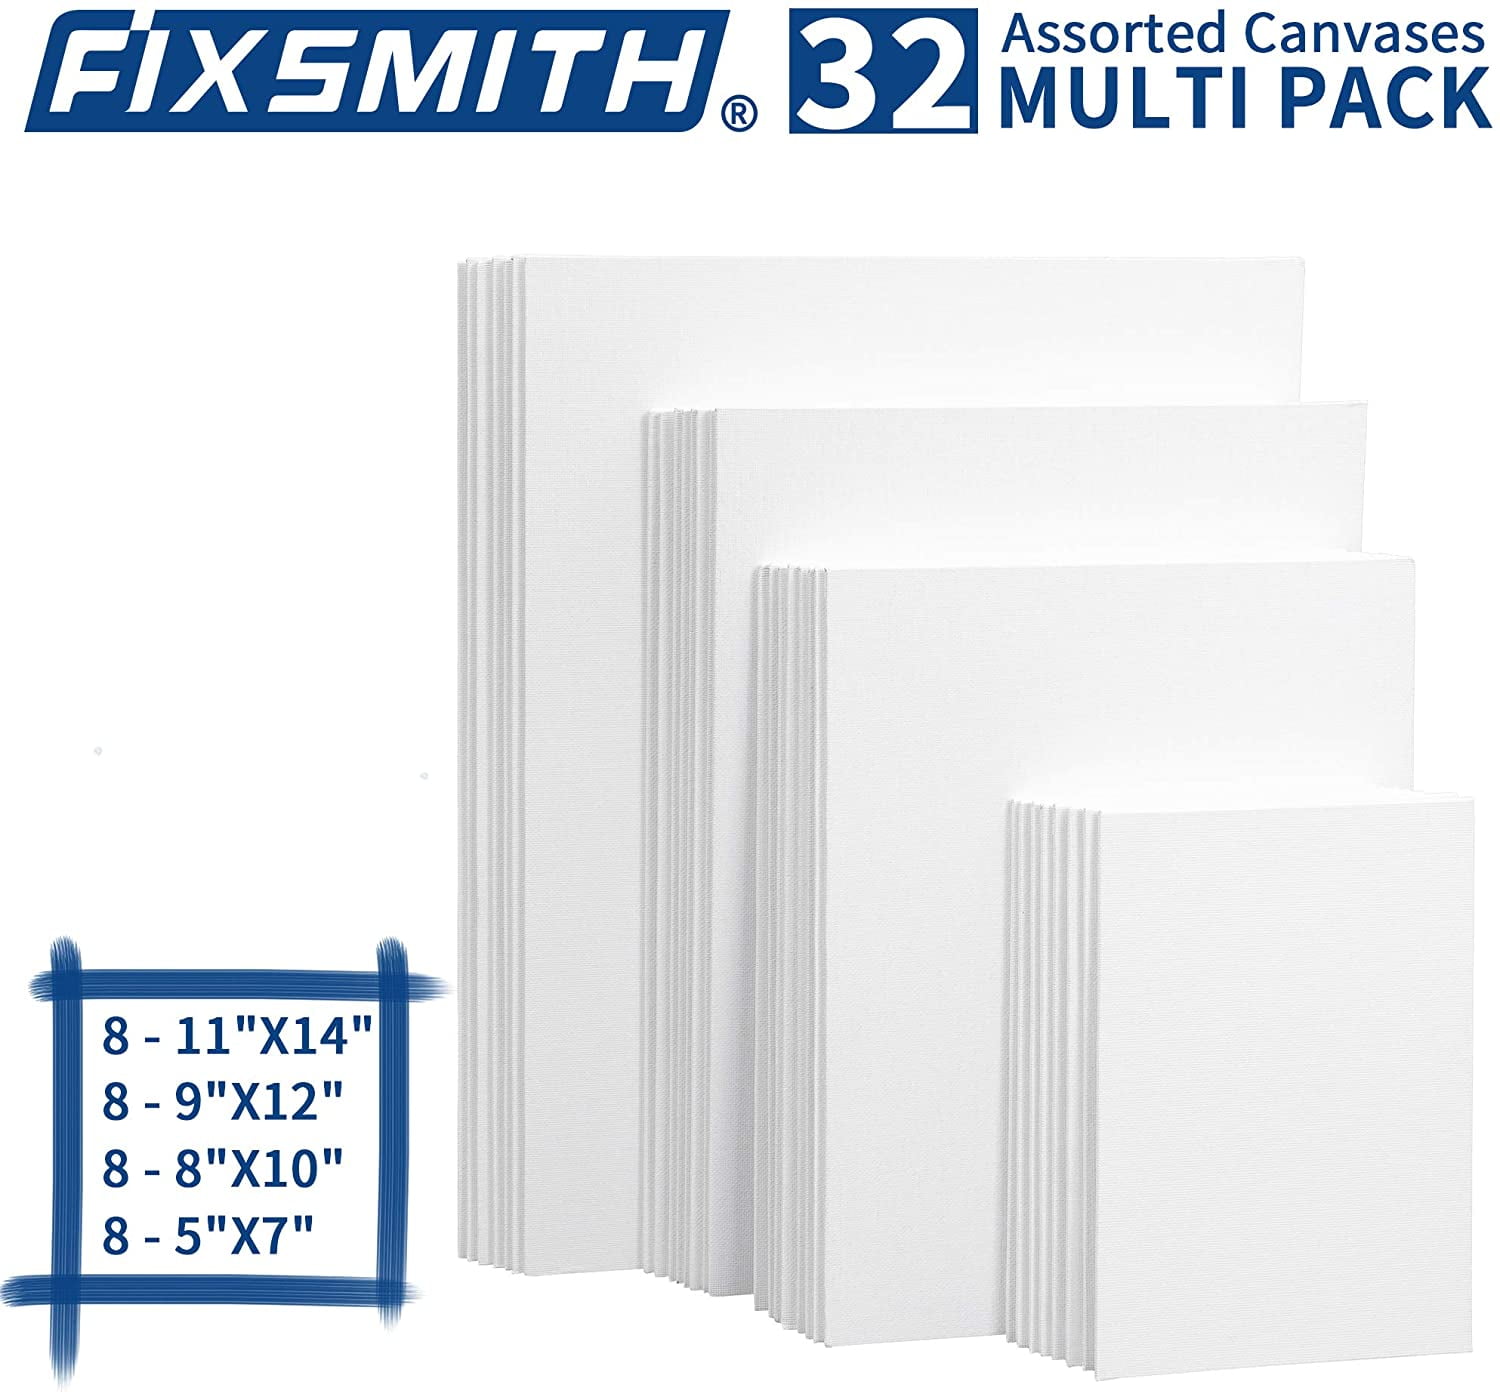  FIXSMITH Canvases for Painting, 9x12 Inch Canvas Boards, Super  Value 24 Pack White Blank Canvas Panels, 100% Cotton Primed，Painting Art  Supplies for Professionals, Hobby Painters, Students & Kids